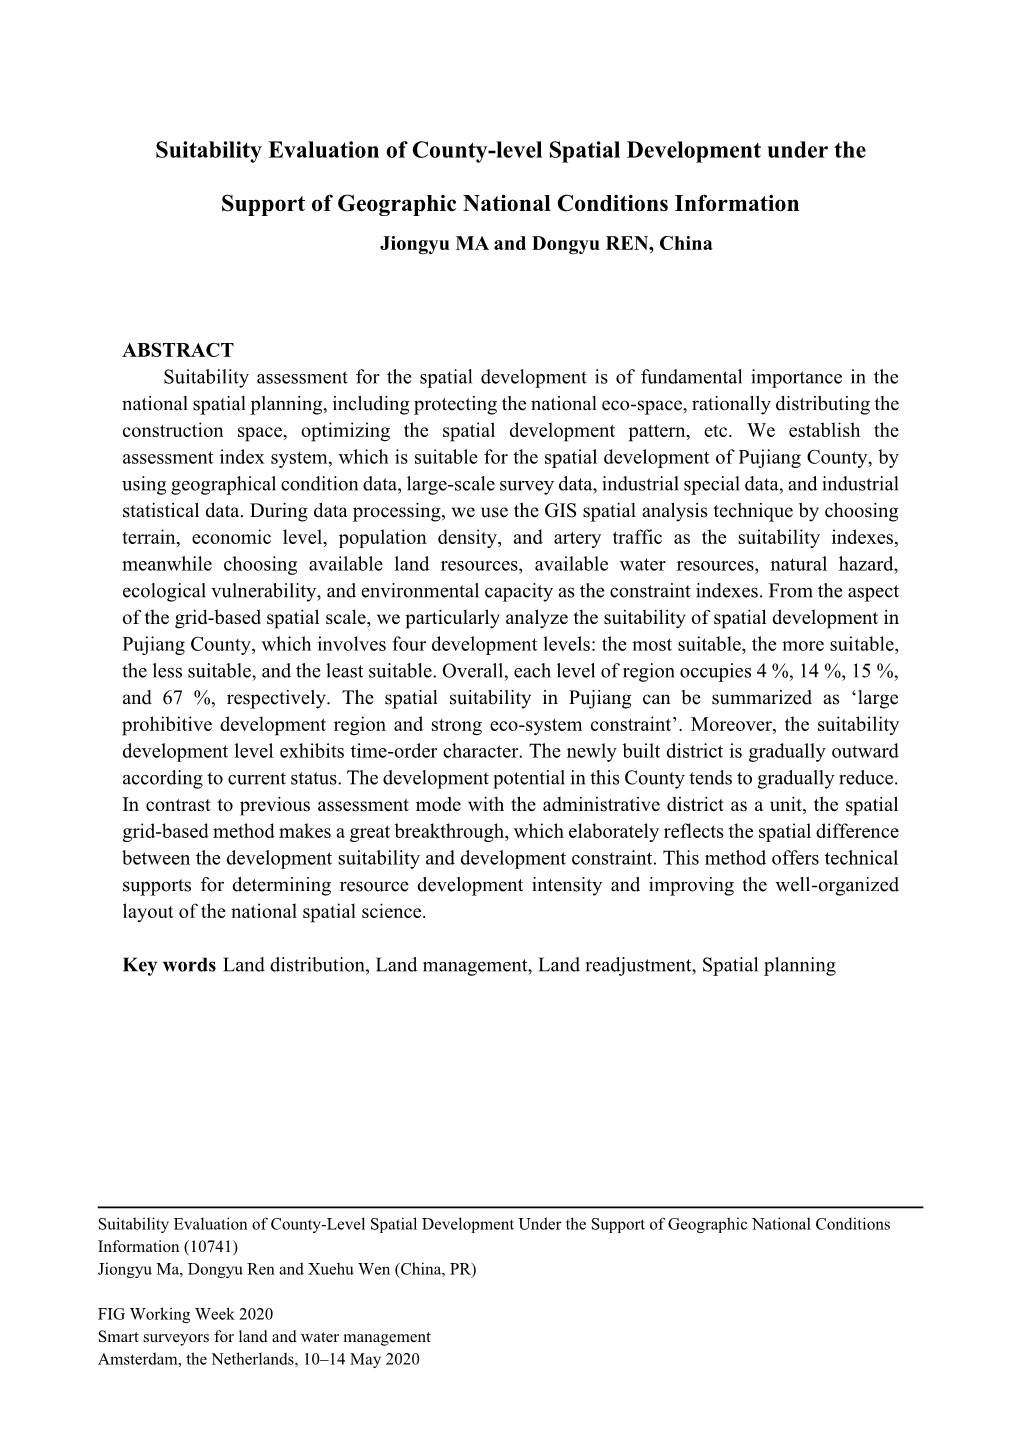 Suitability Evaluation of County-Level Spatial Development Under The